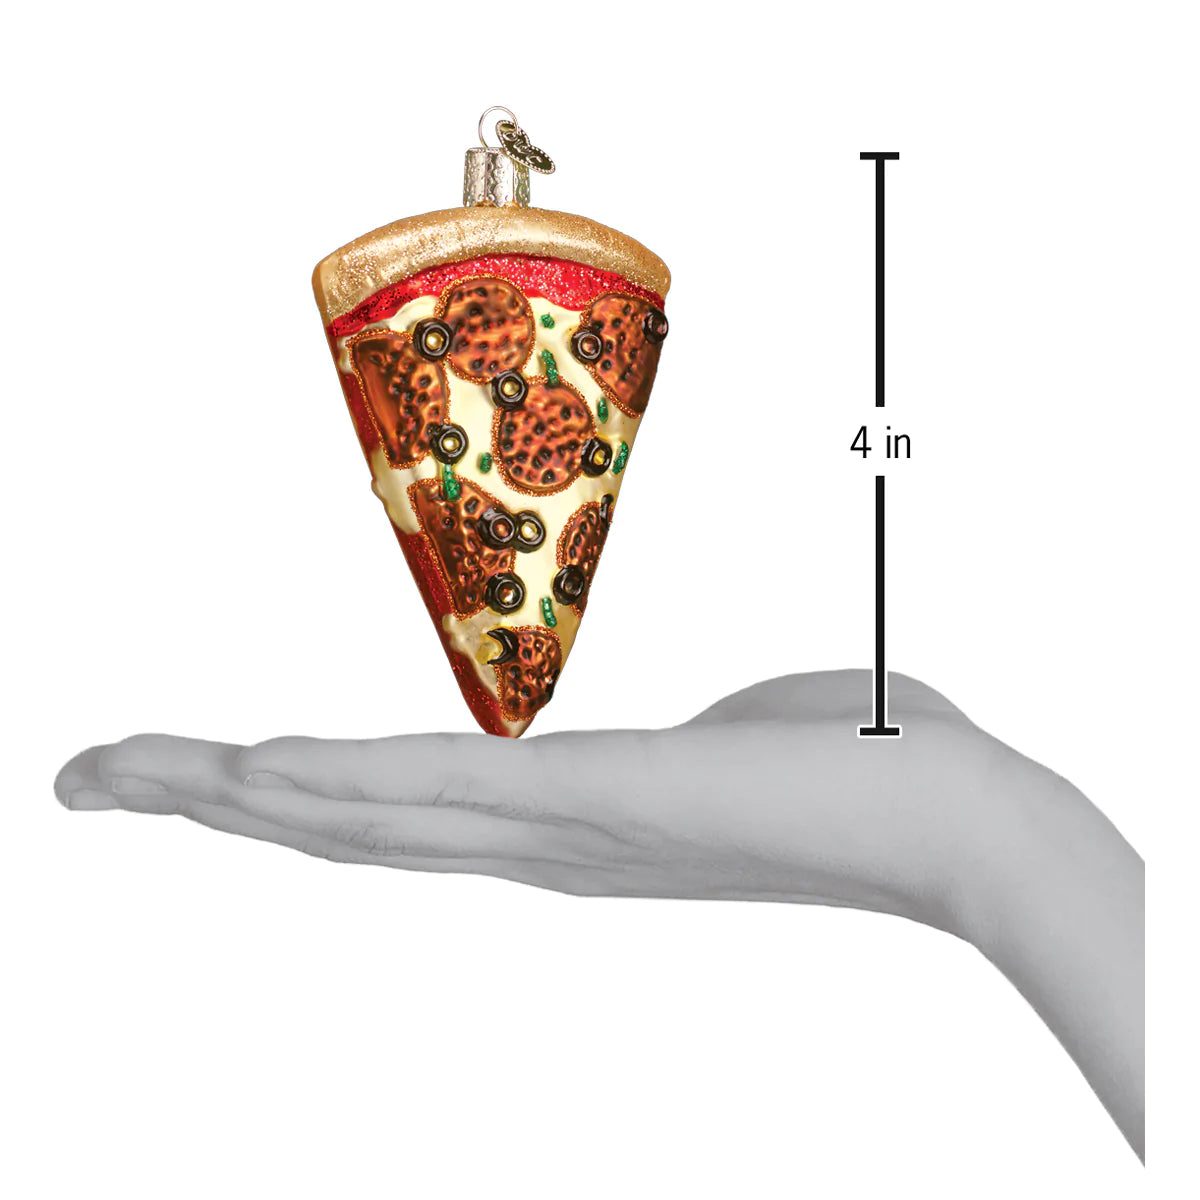 Pizza Slice Ornament  Old World Christmas   